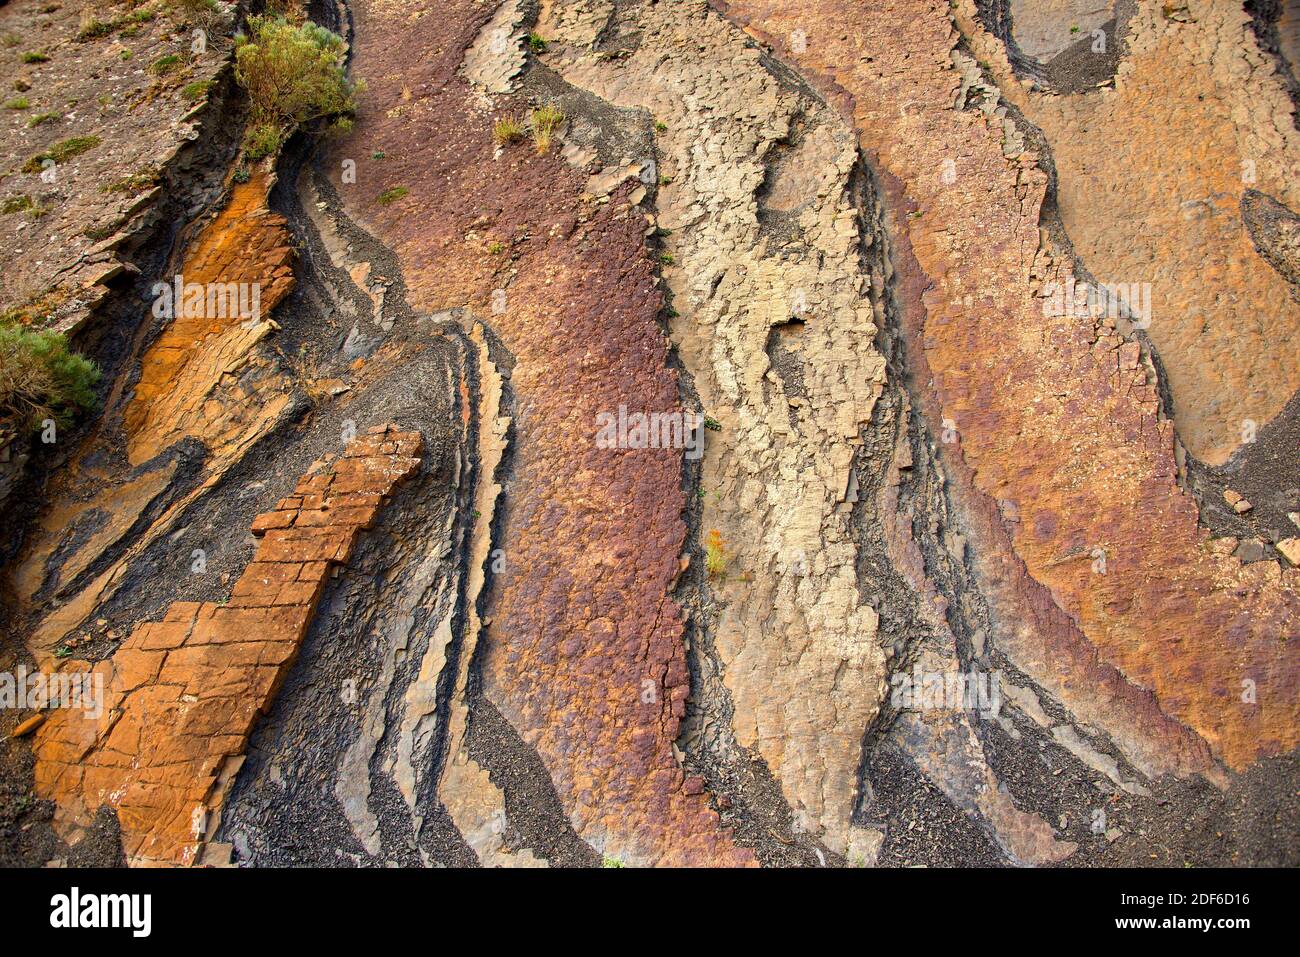 Colorful vertical strata composed of red sandstone and black lutites rich in organic matter.This geological formation known as Ribero Pintado is Stock Photo